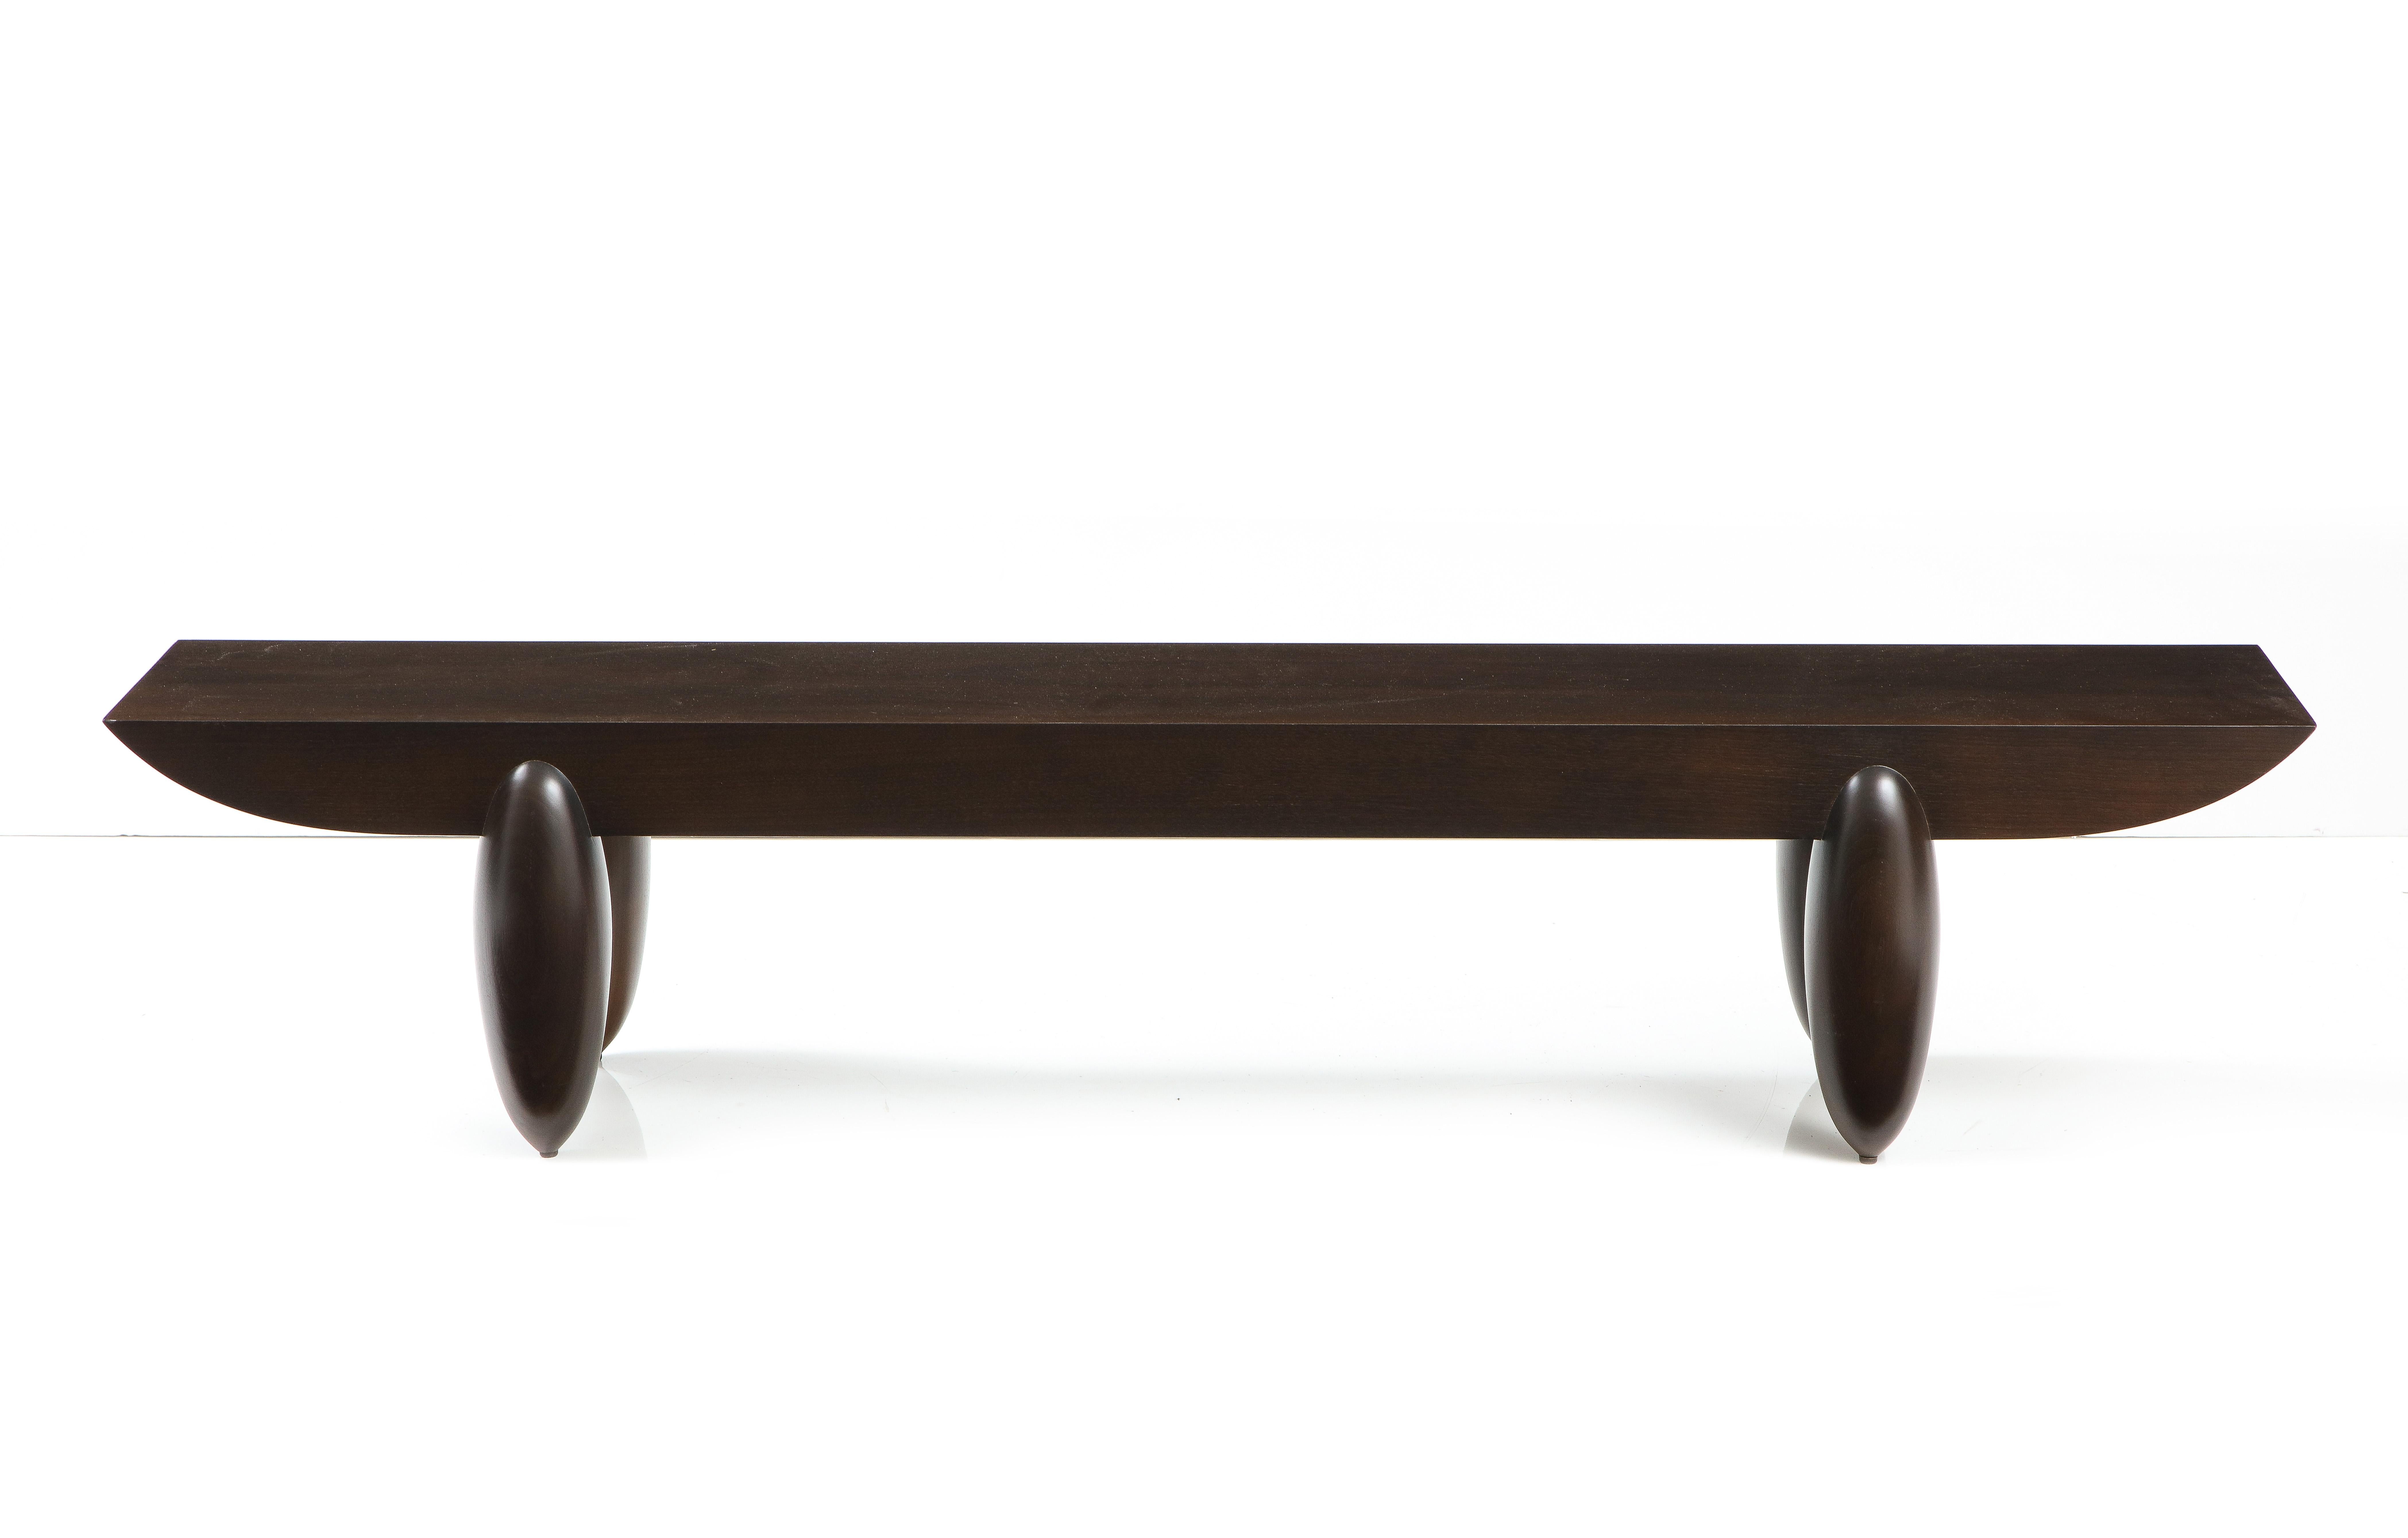 A dark chocolate brown wood bench by Christian Liaigre, the elegant and simple top with tapered edges resting on four bulbous legs, made in France for Holly Hunt stamped underneath. Simple, big, bold and beautiful, this bench is compatible with a